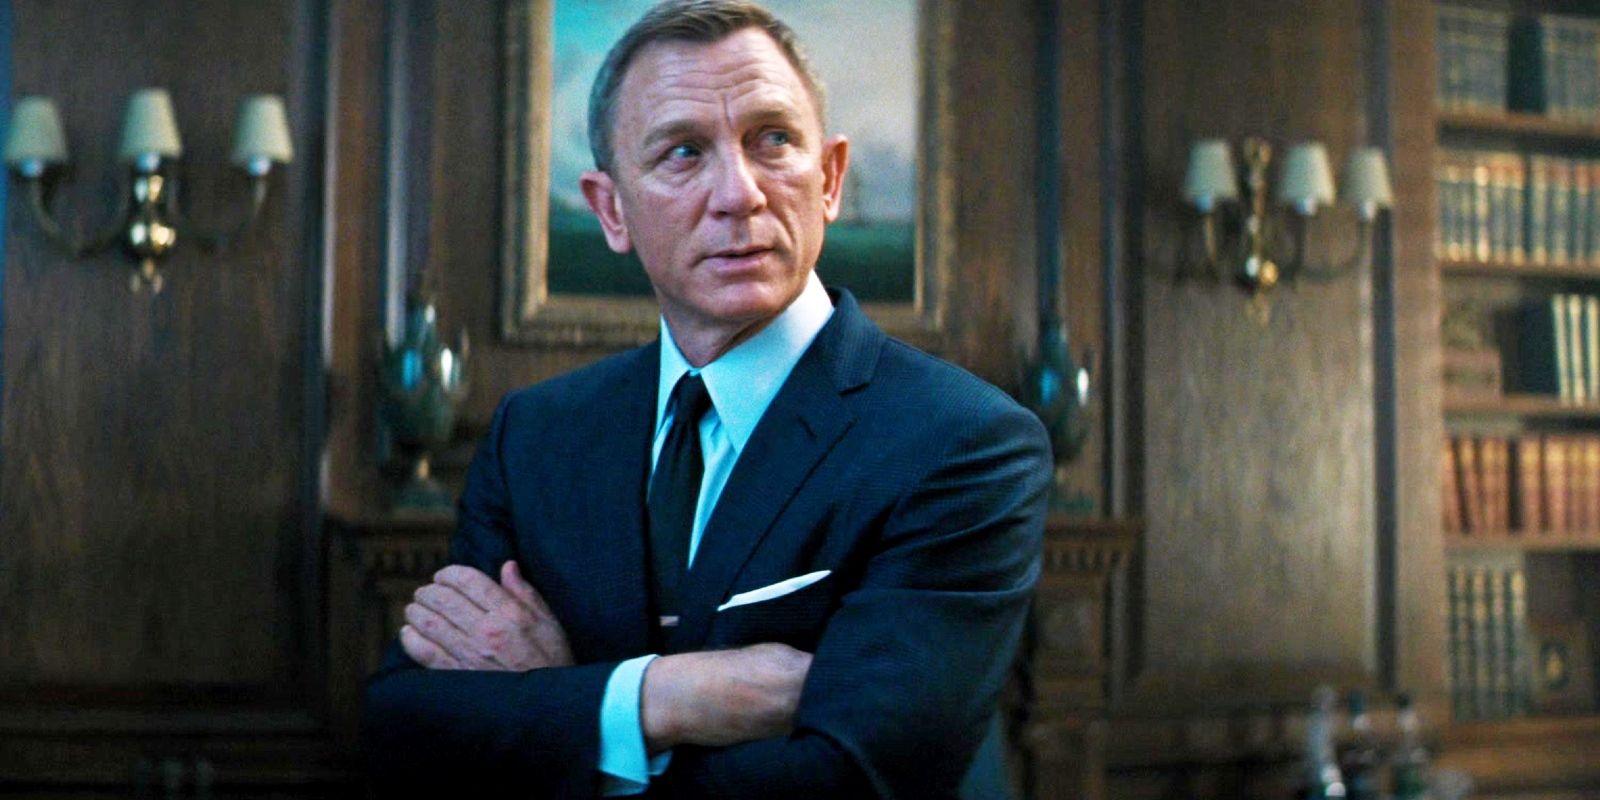 james-bond-contender-actually-wants-to-play-007-agent’s-villain